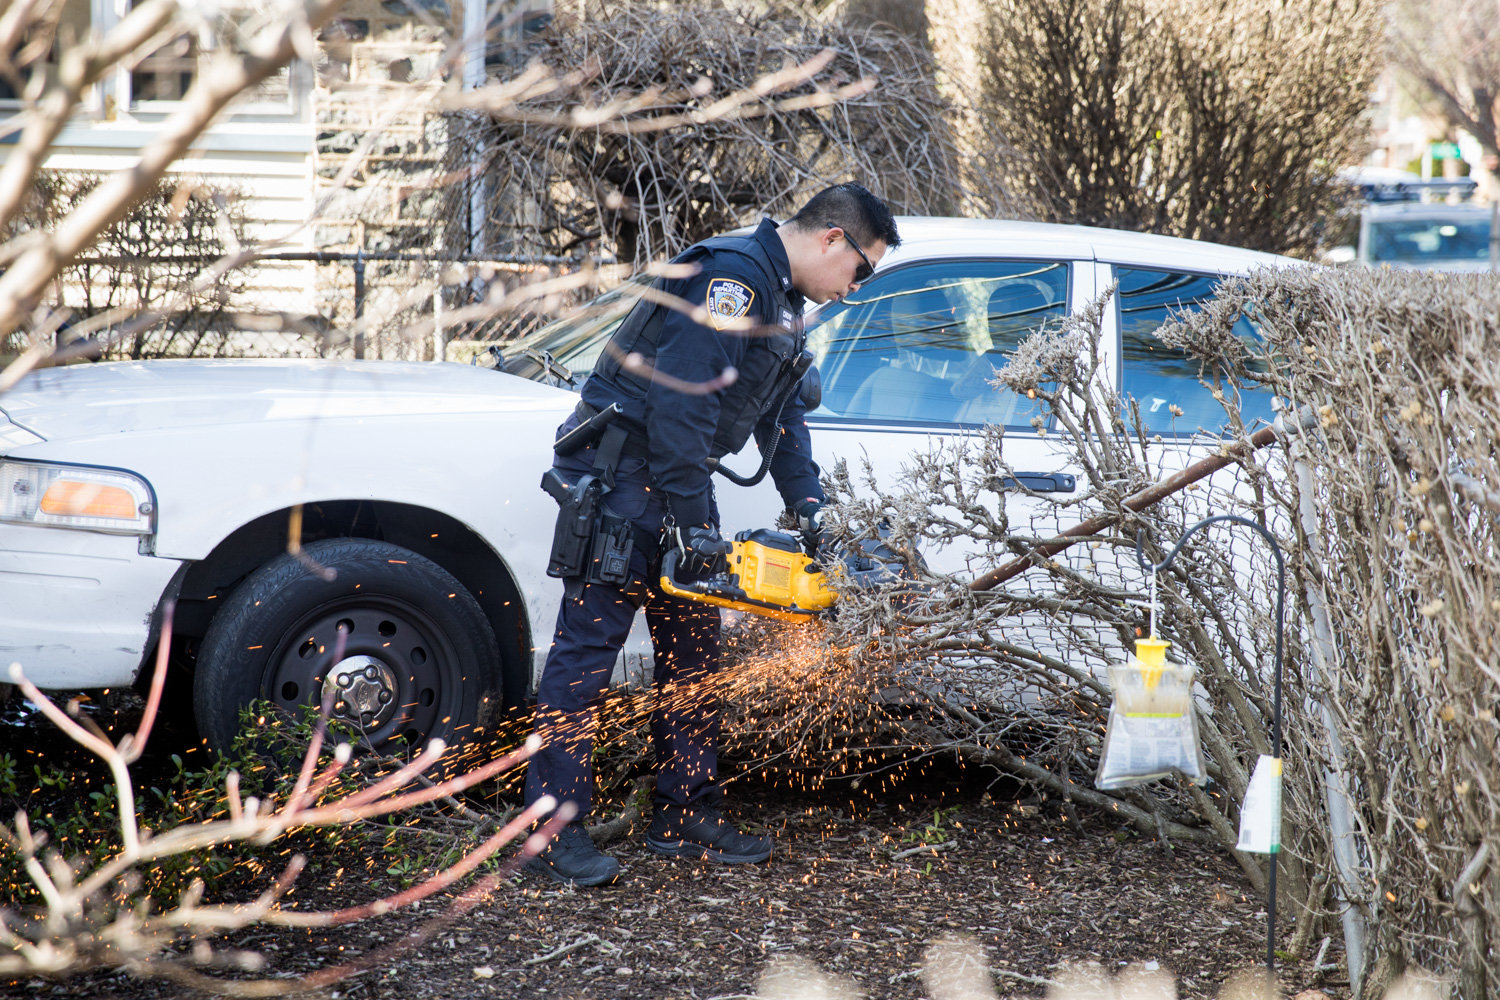 A police officer cuts away part of a wire mesh fence outside 400 W. 261st St., where a car crashed through the fence on the morning of Feb. 27,